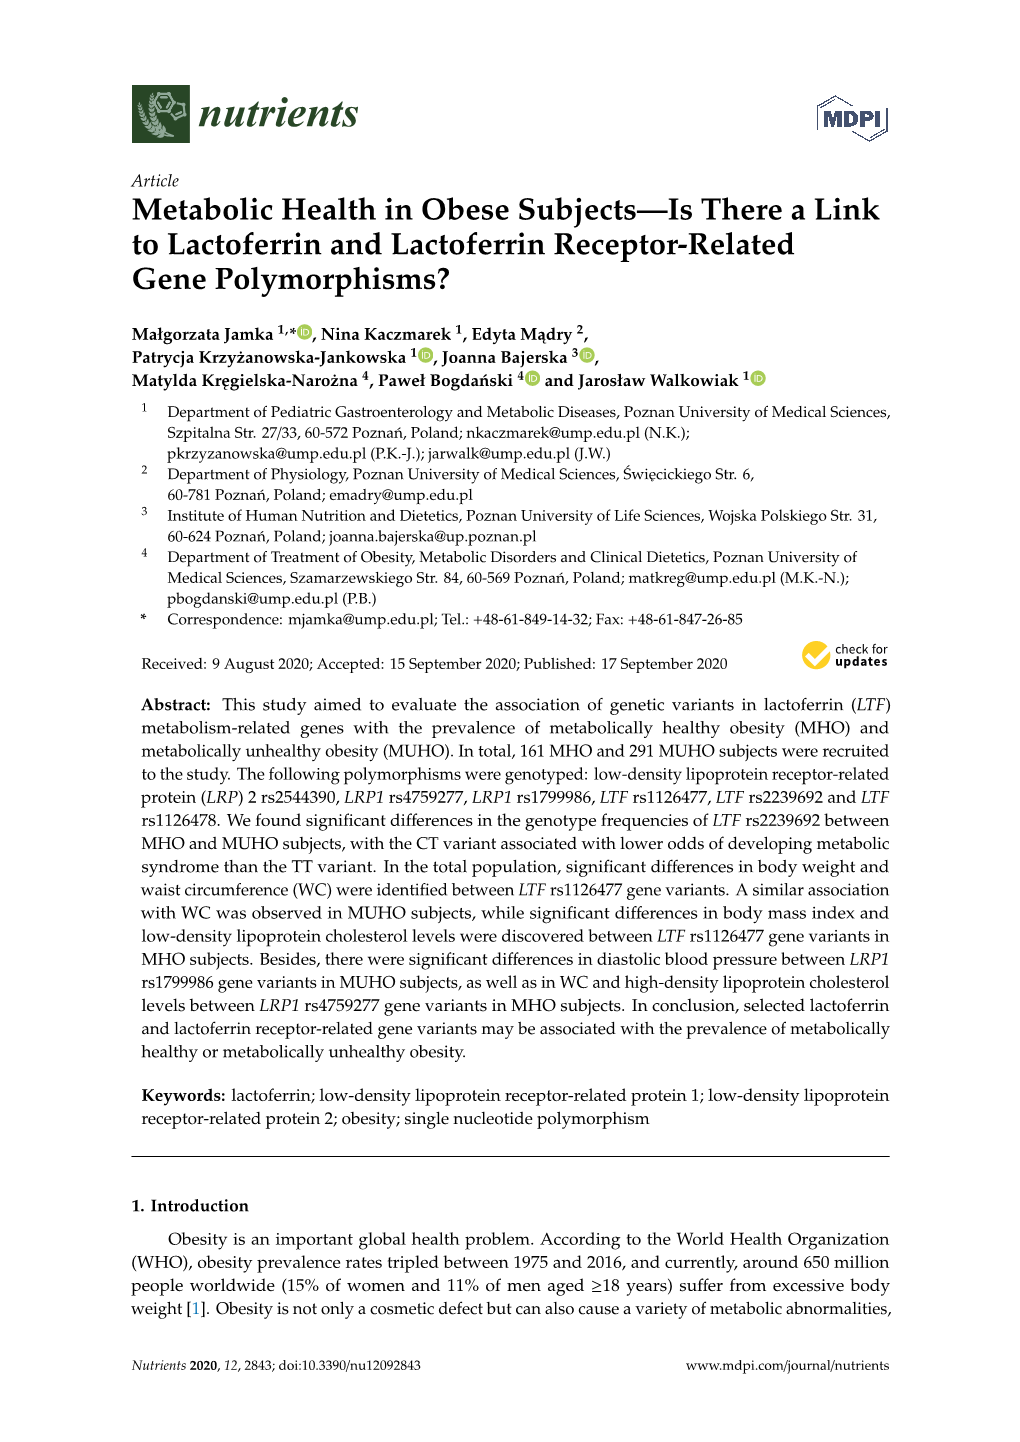 Metabolic Health in Obese Subjects—Is There a Link to Lactoferrin and Lactoferrin Receptor-Related Gene Polymorphisms?